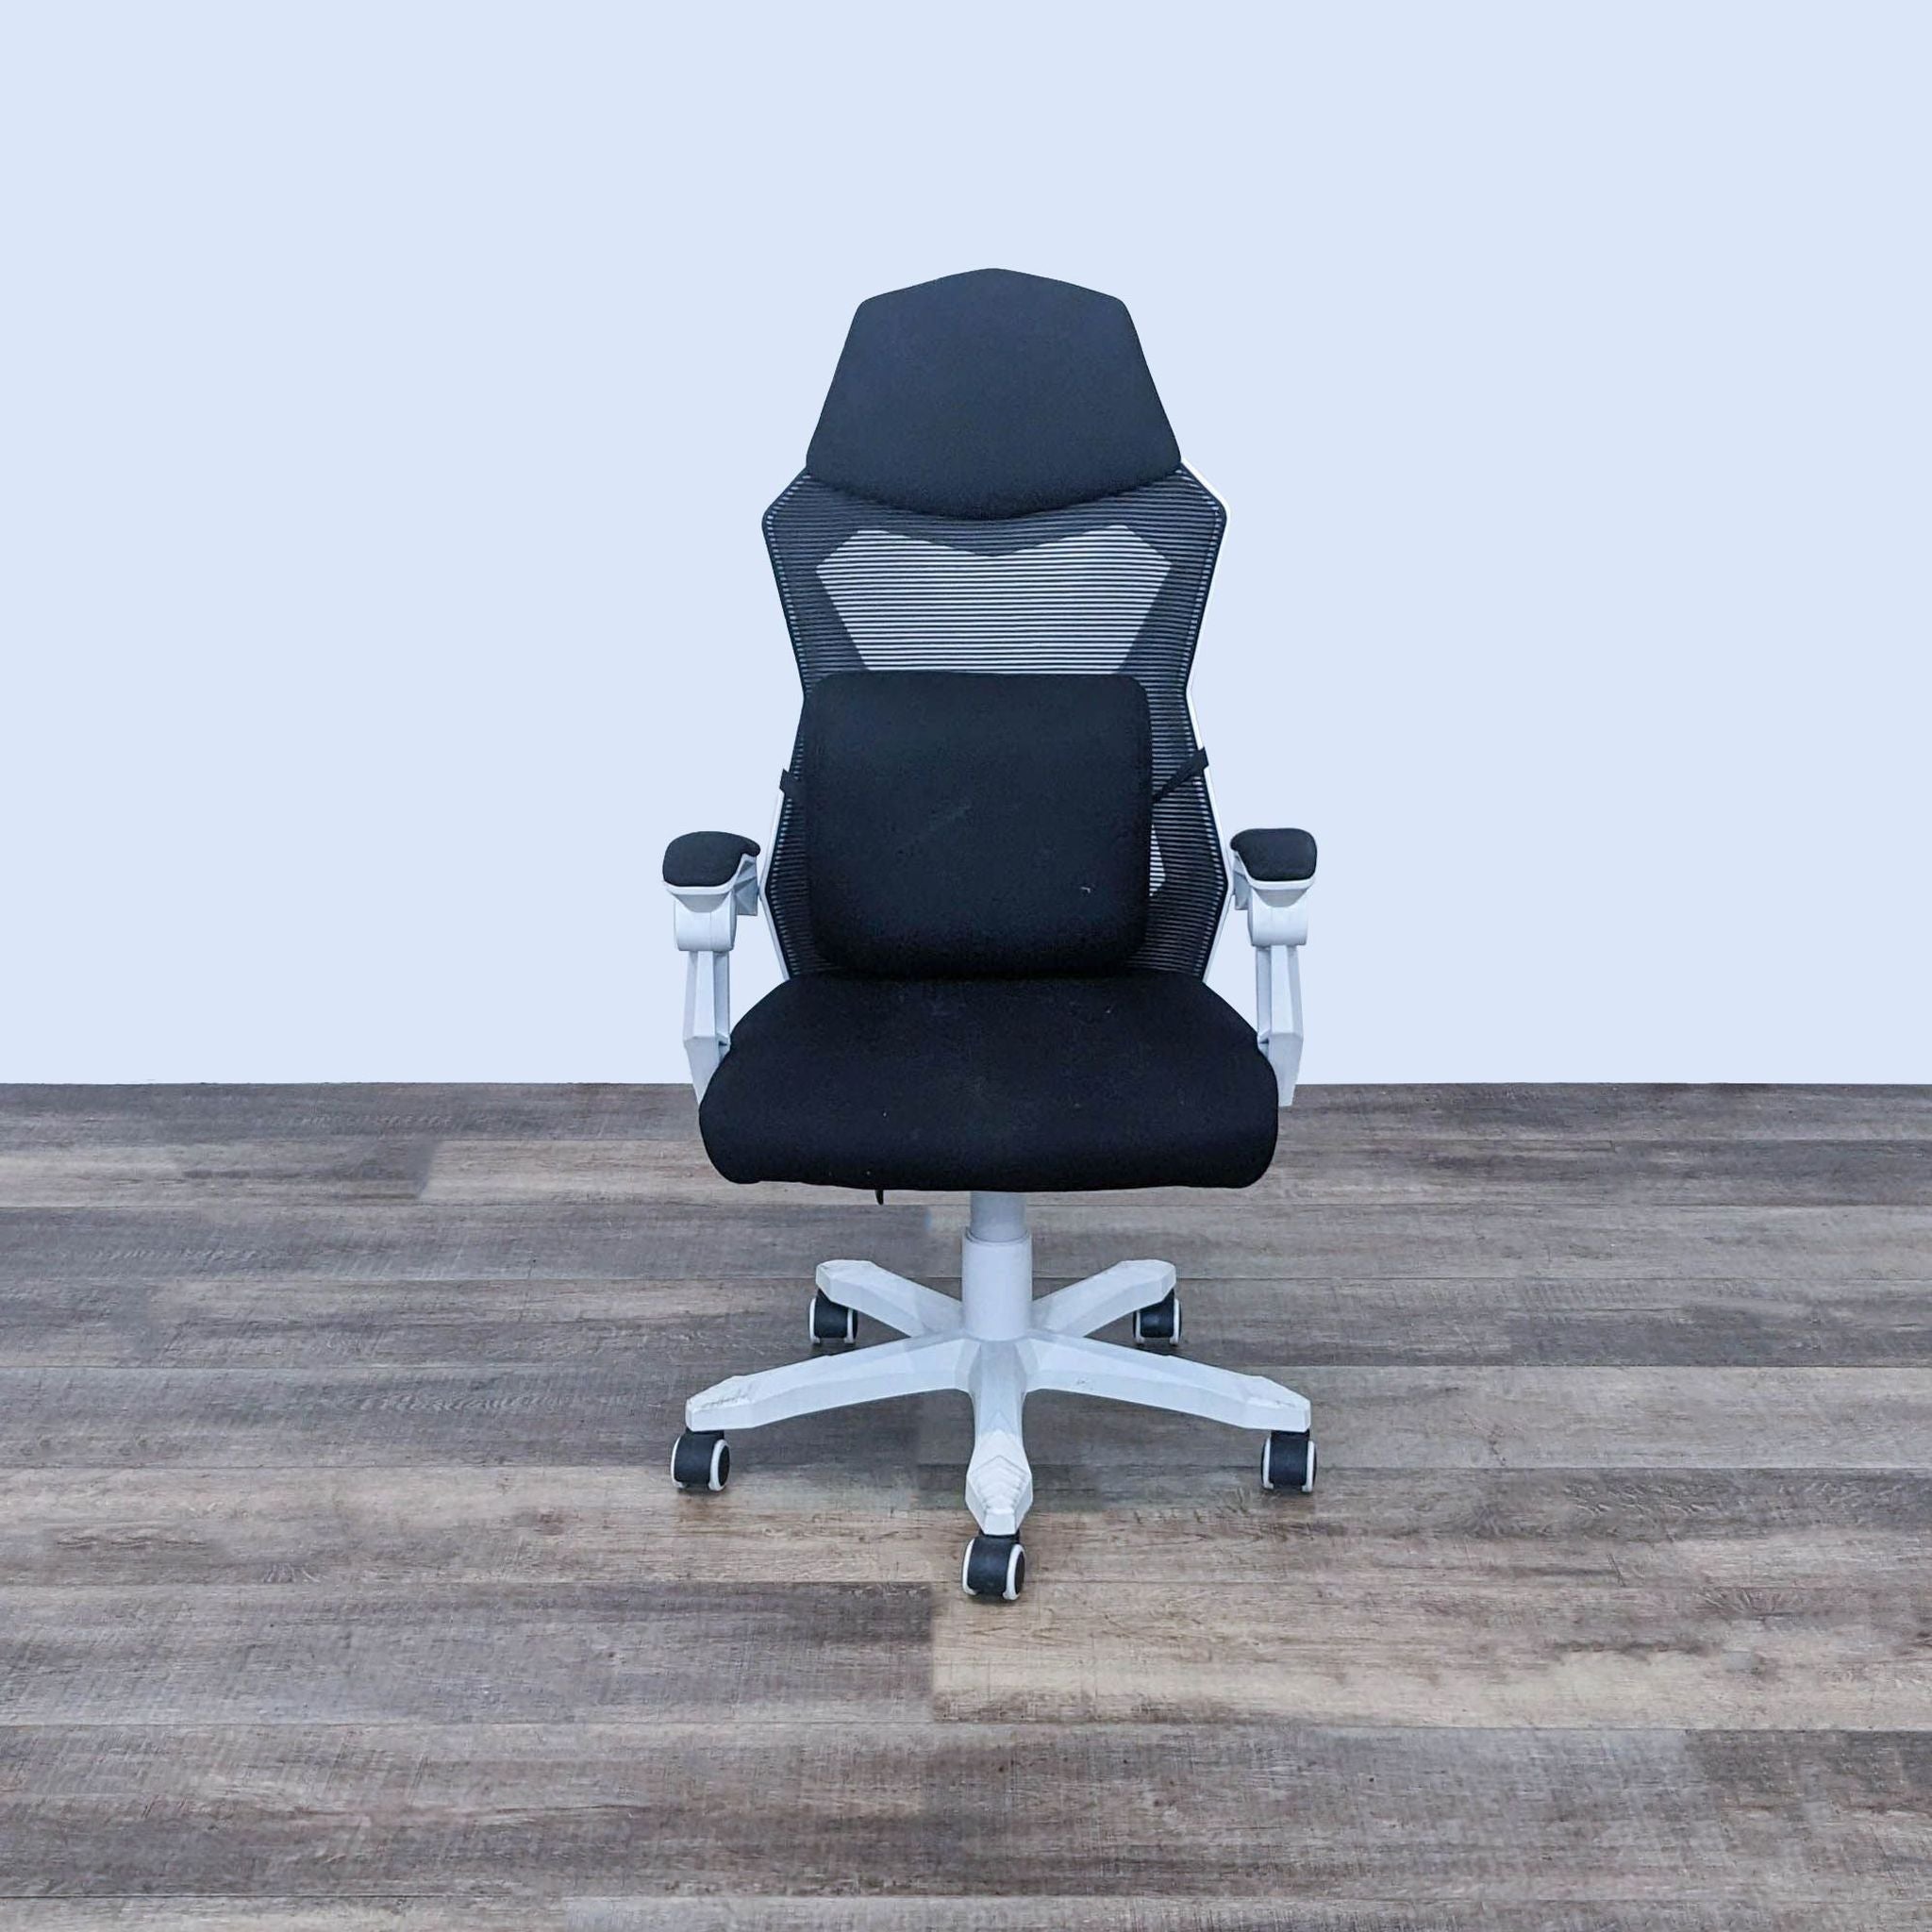 Reperch modern gaming chair with cushioned seat, lumbar support, headrest, and adjustable height on a five-point base.